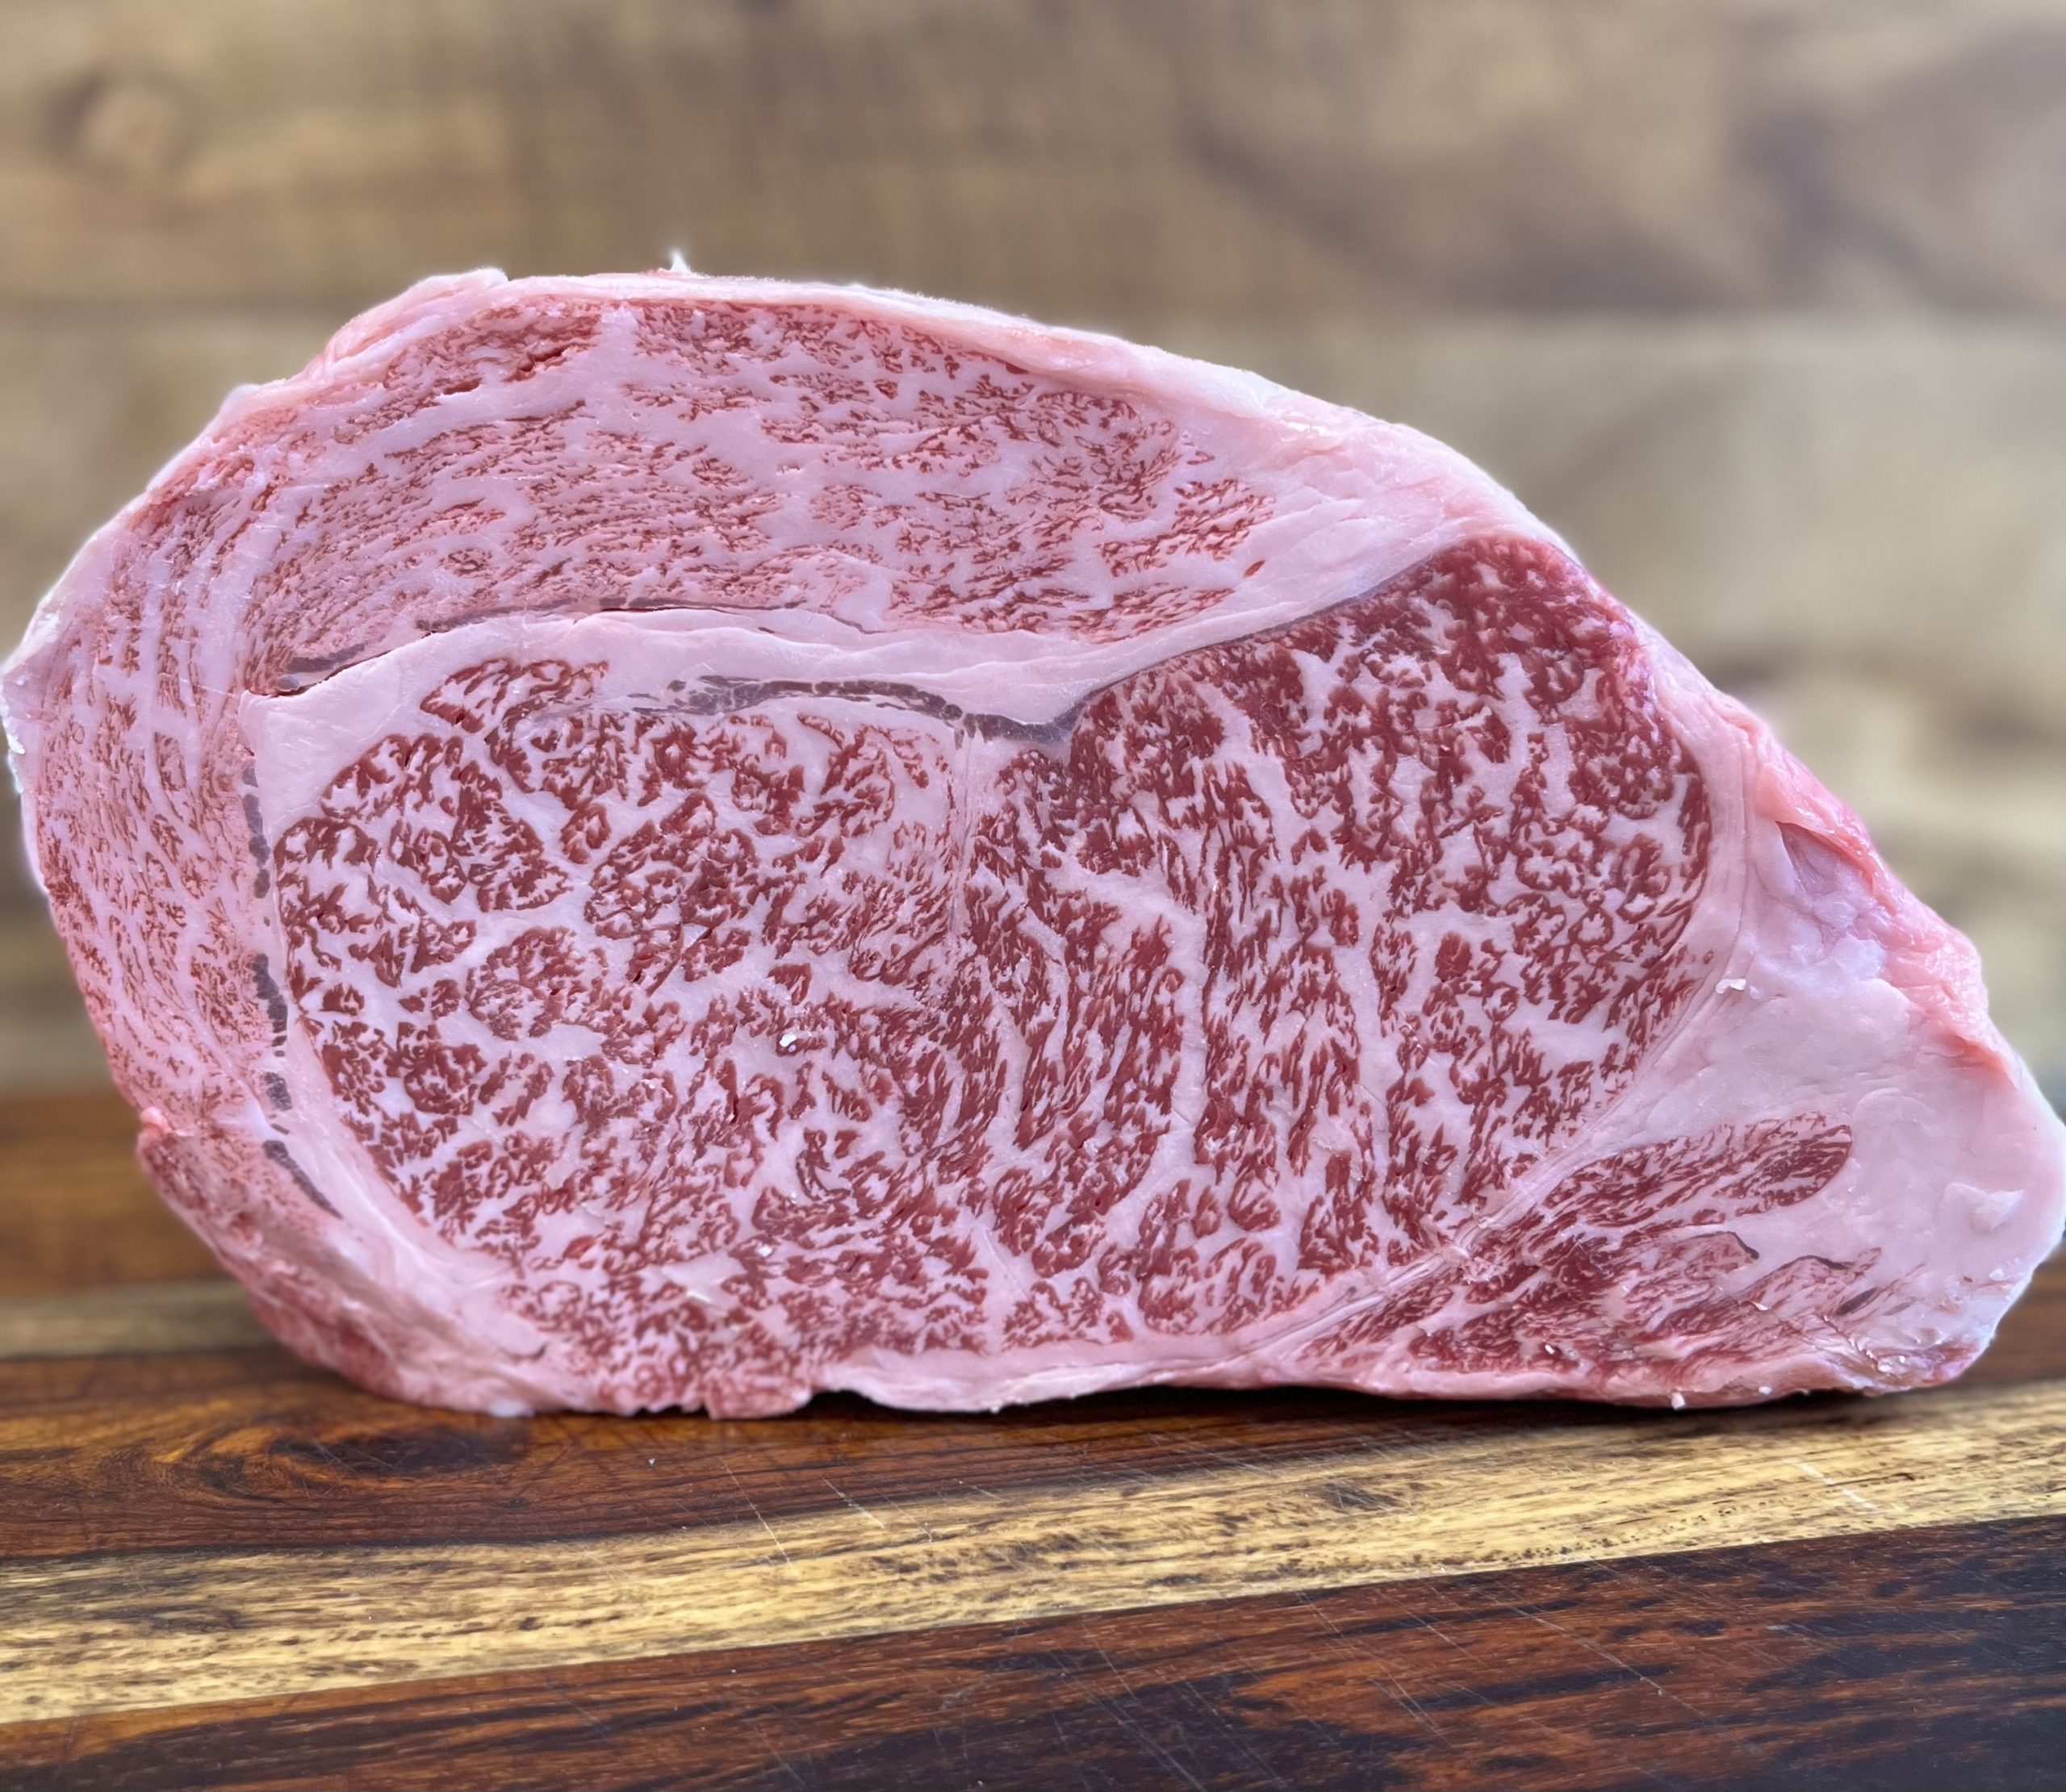 wagyu beef. most often available as A5 wagyu. Most often in stock for the holidays.